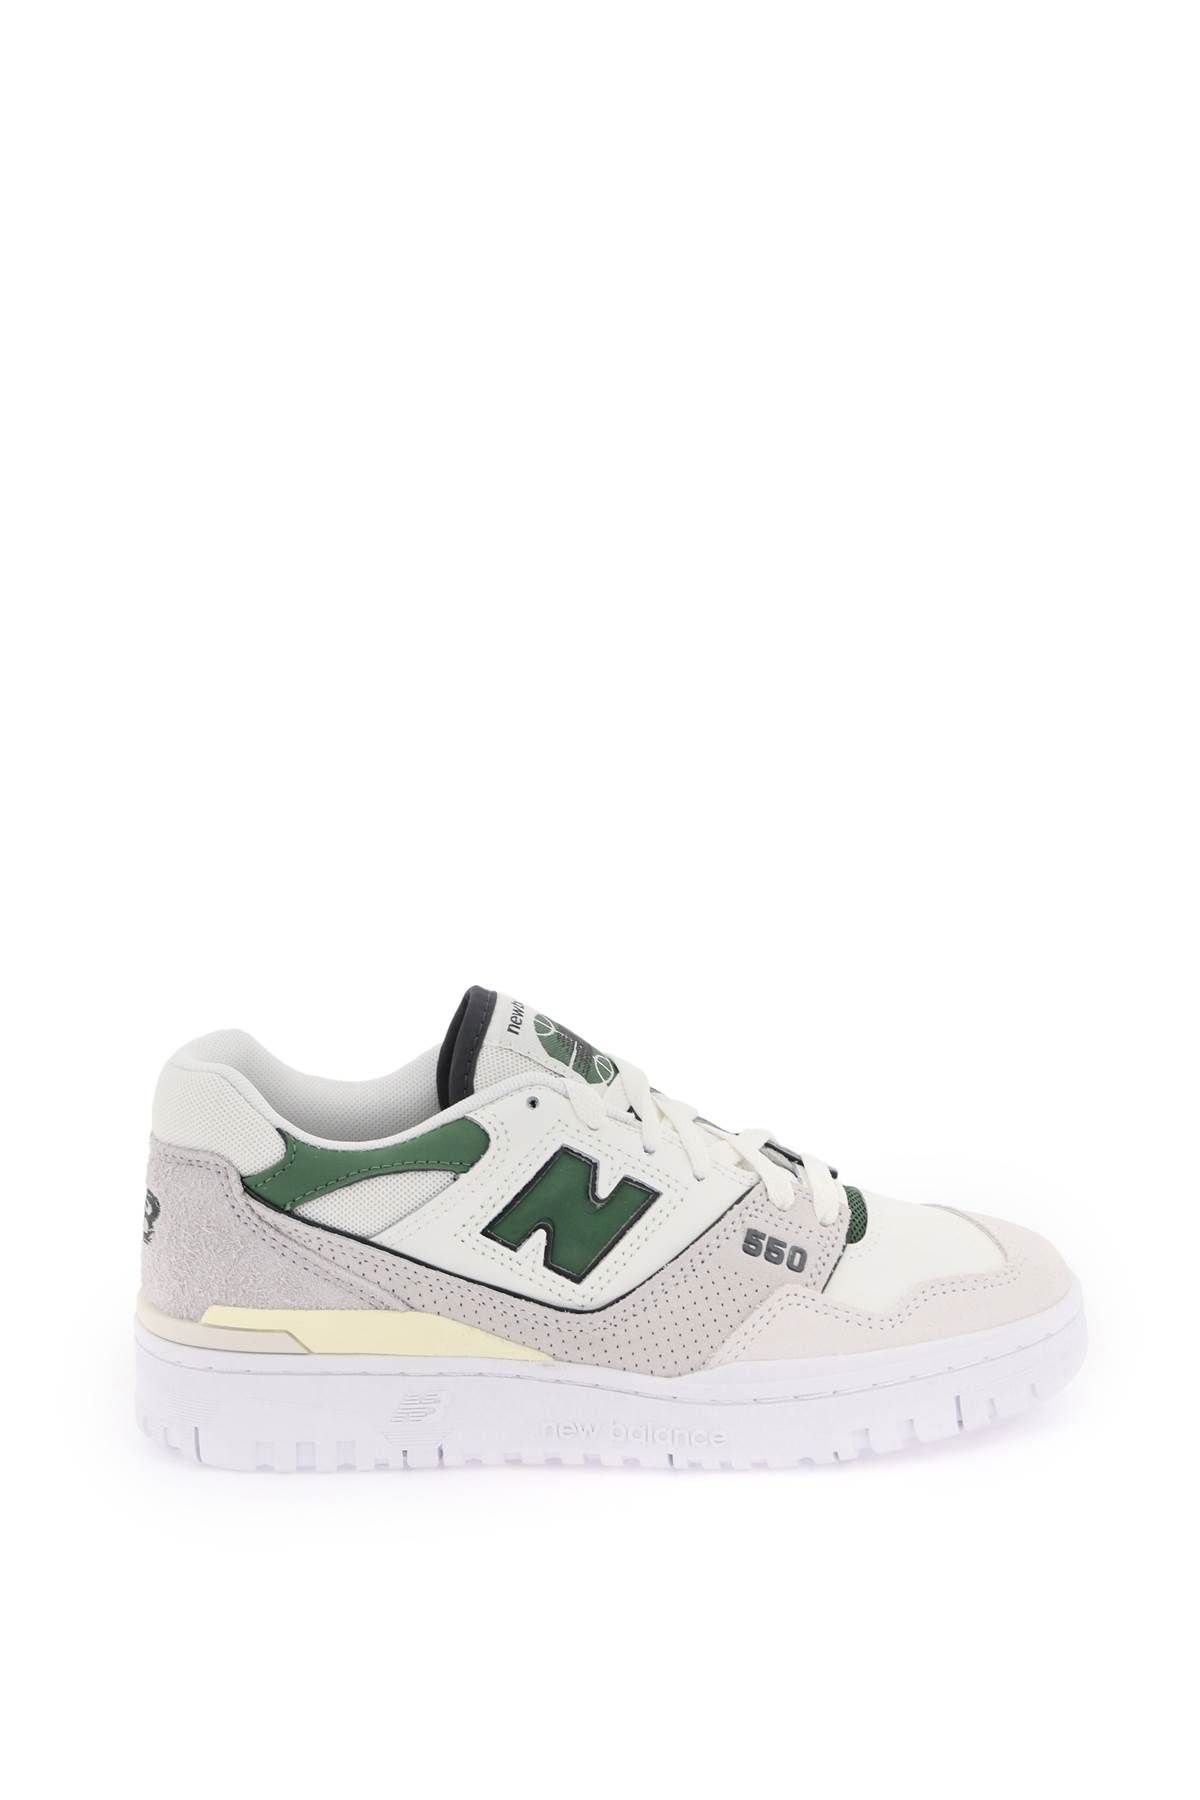 New Balance 550 Sneakers In Beige,white,green